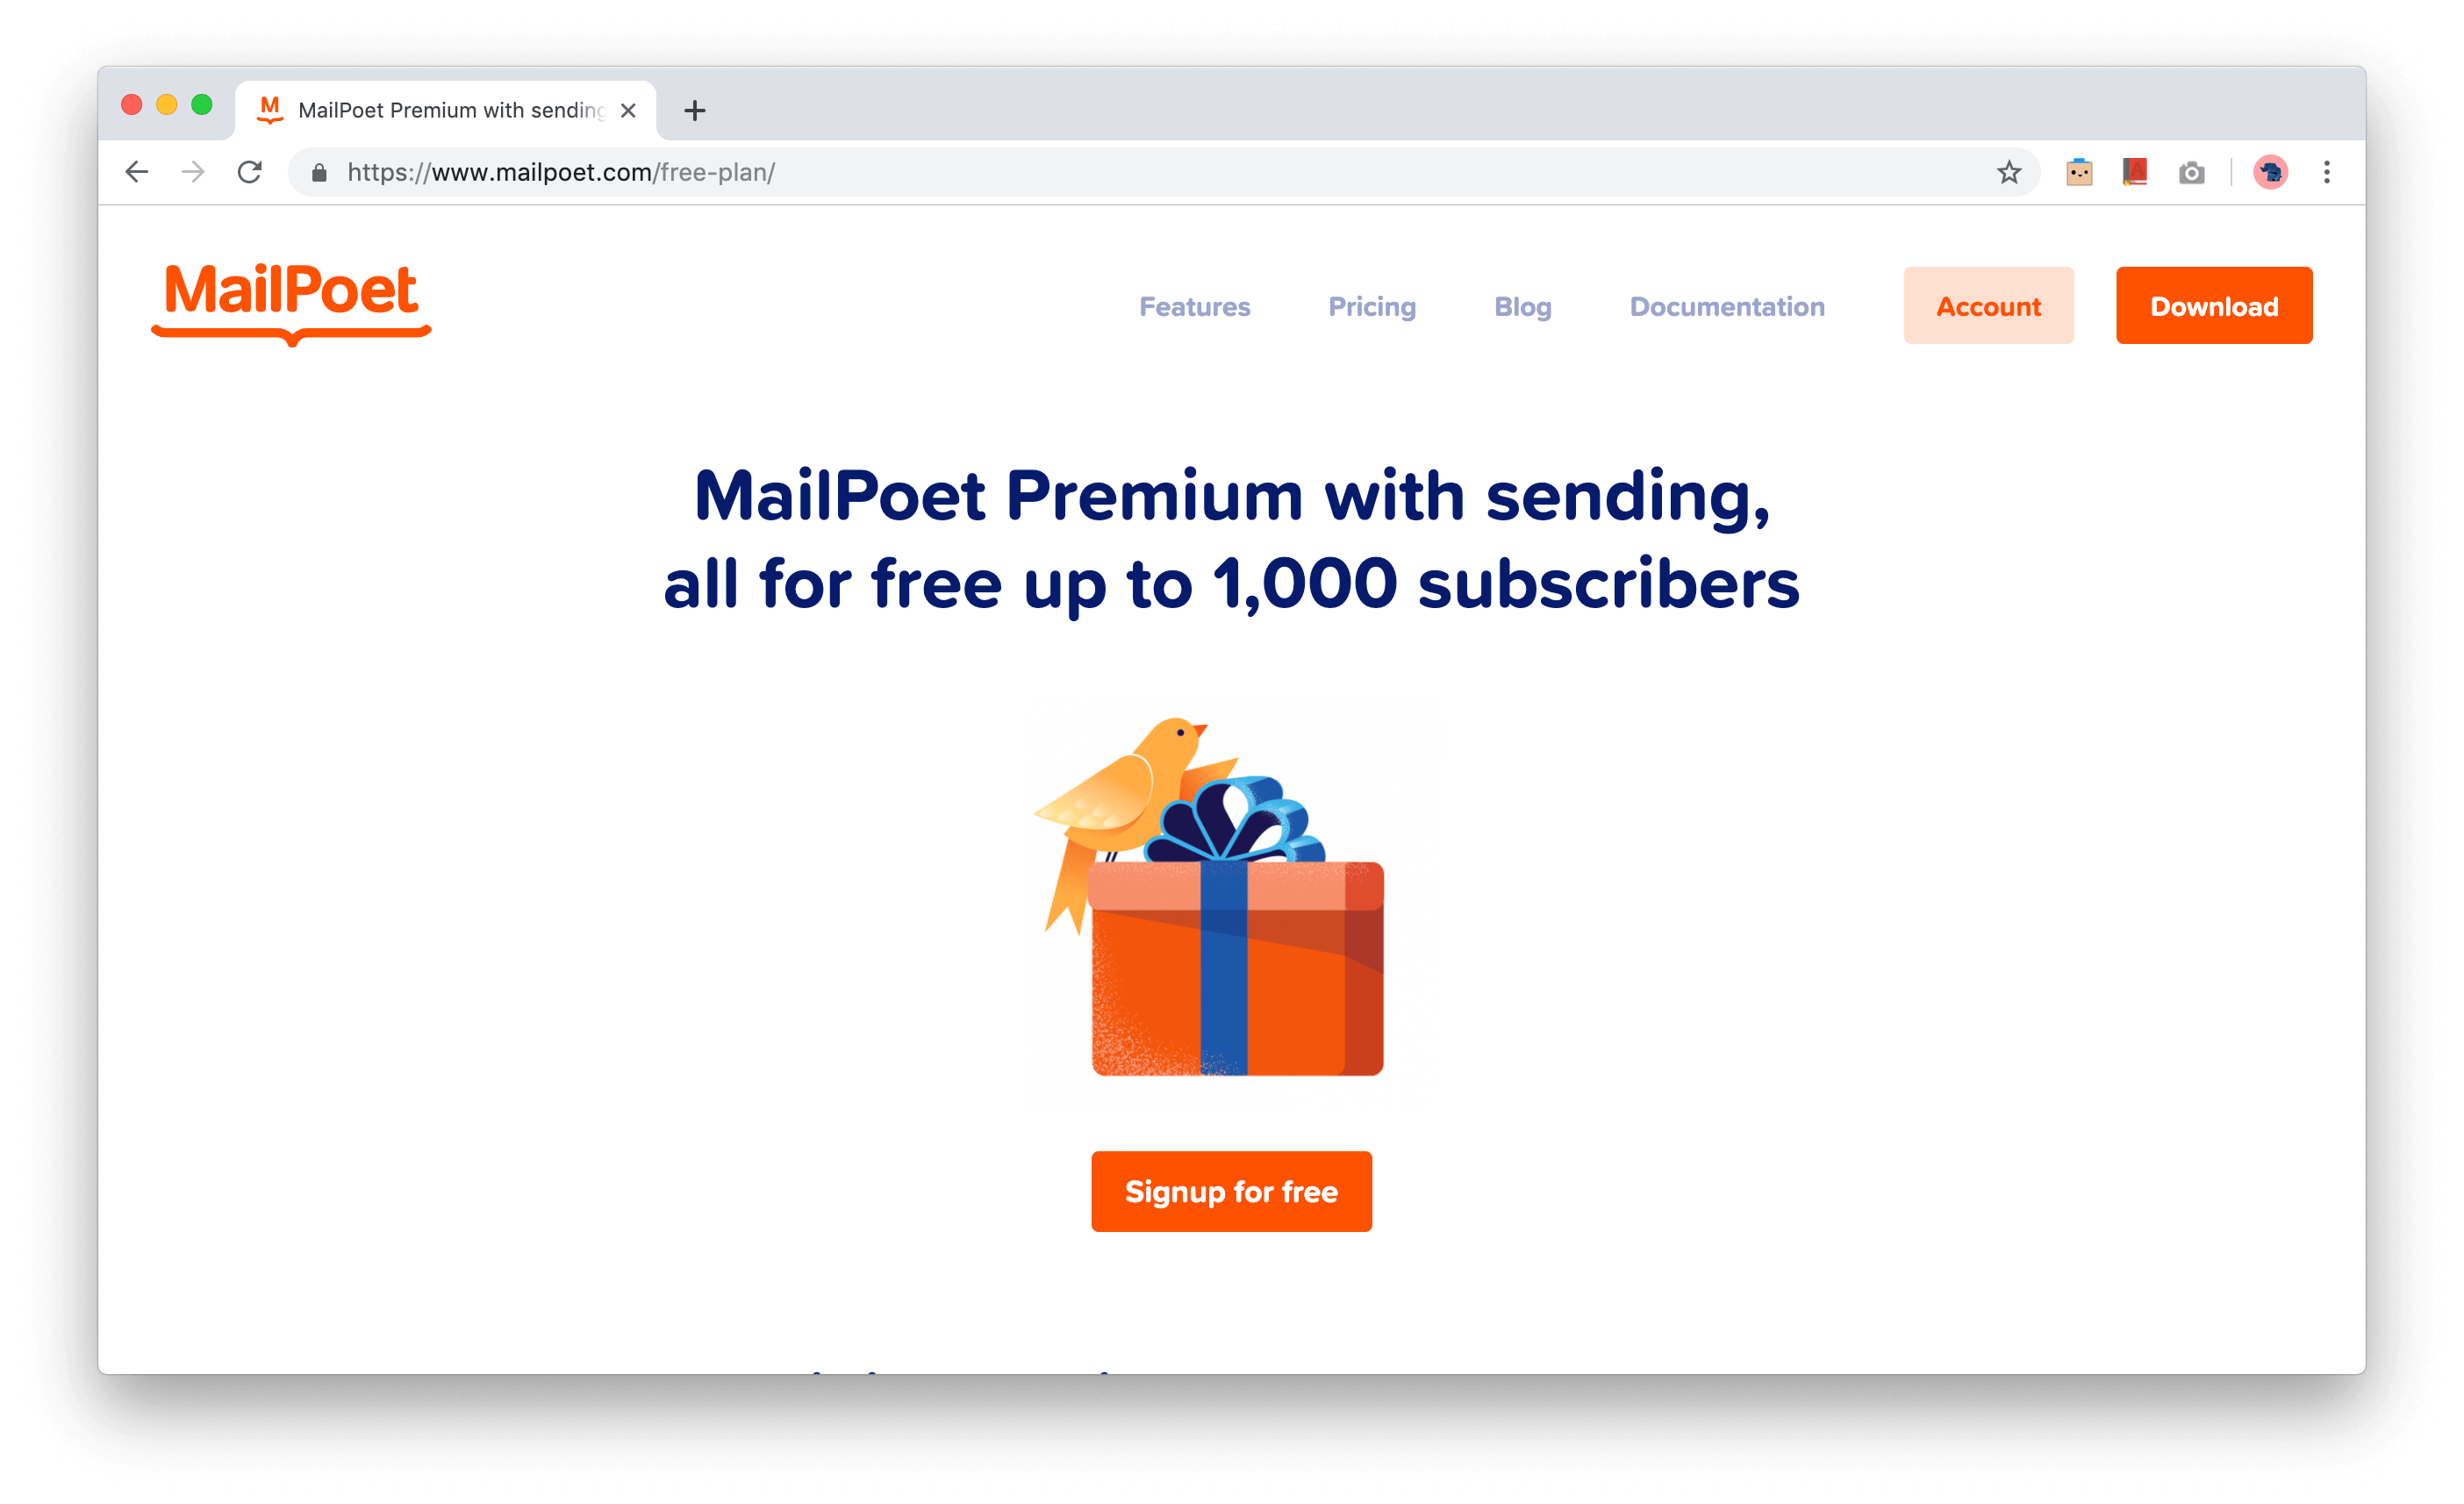 mailpoet-free-plan-email-marketing-for-wordpress-tinified-1622967